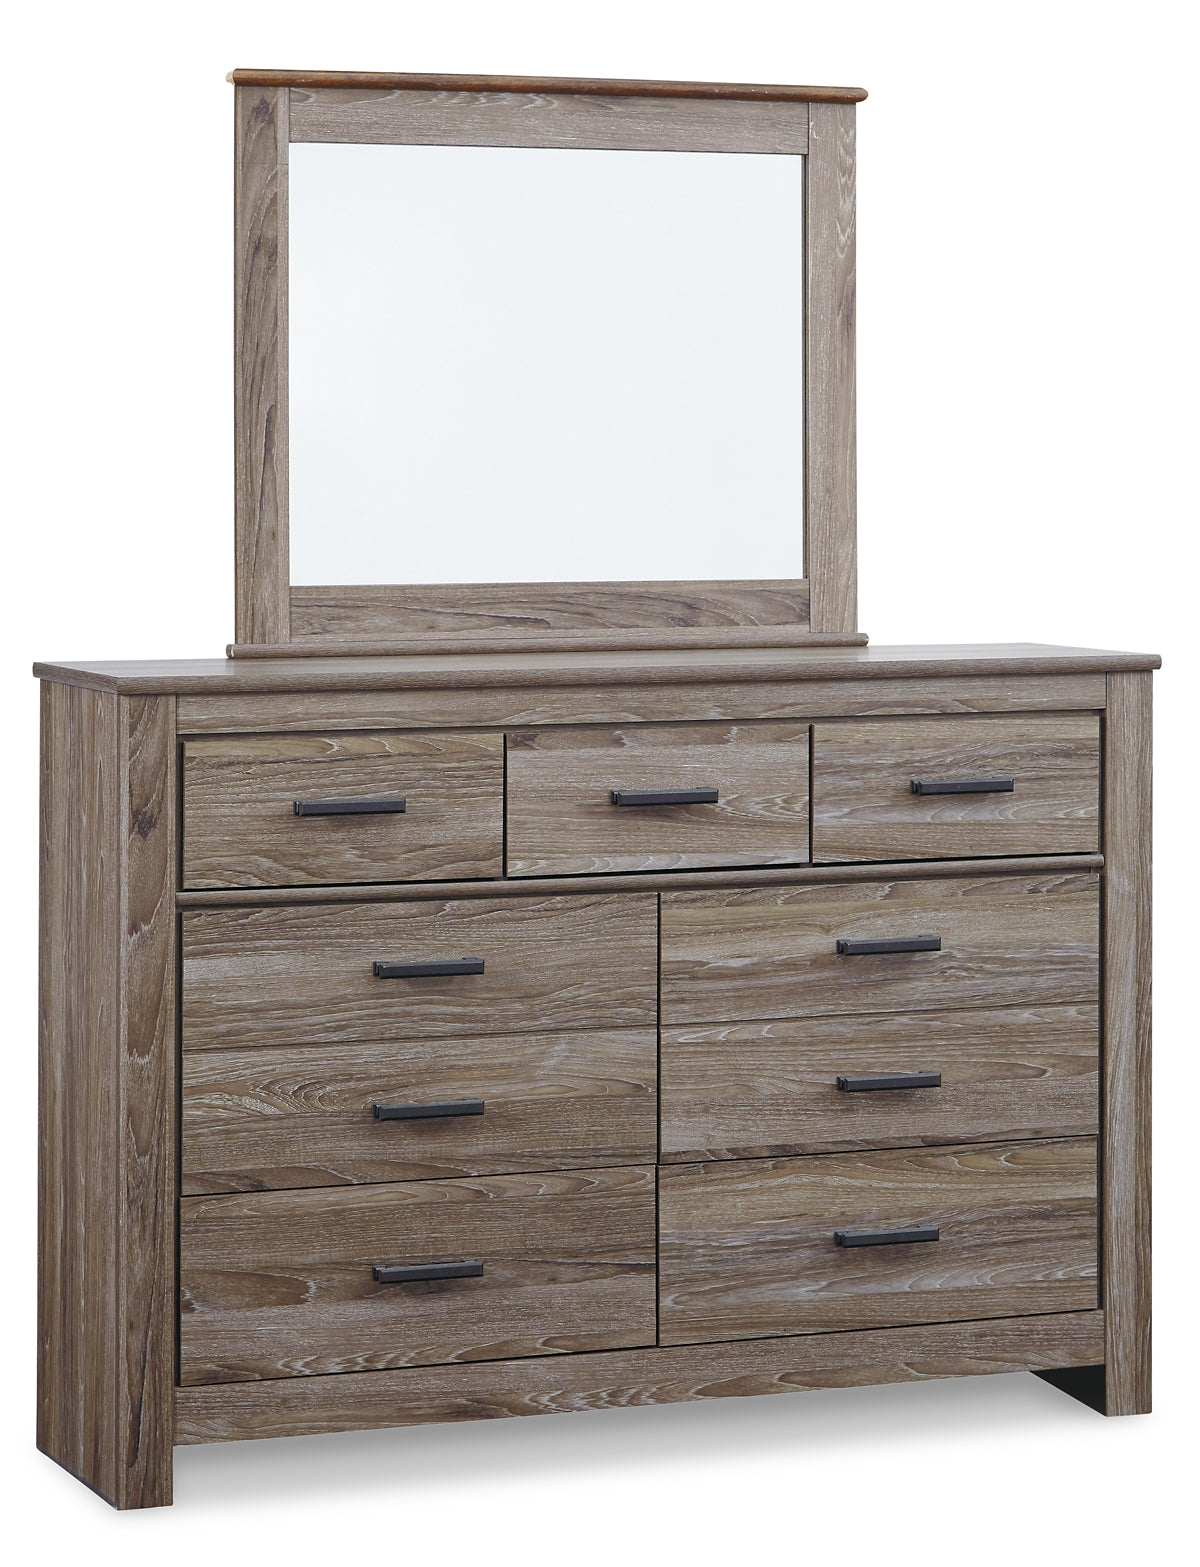 Zelen Full Panel Bed with Mirrored Dresser, Chest and Nightstand